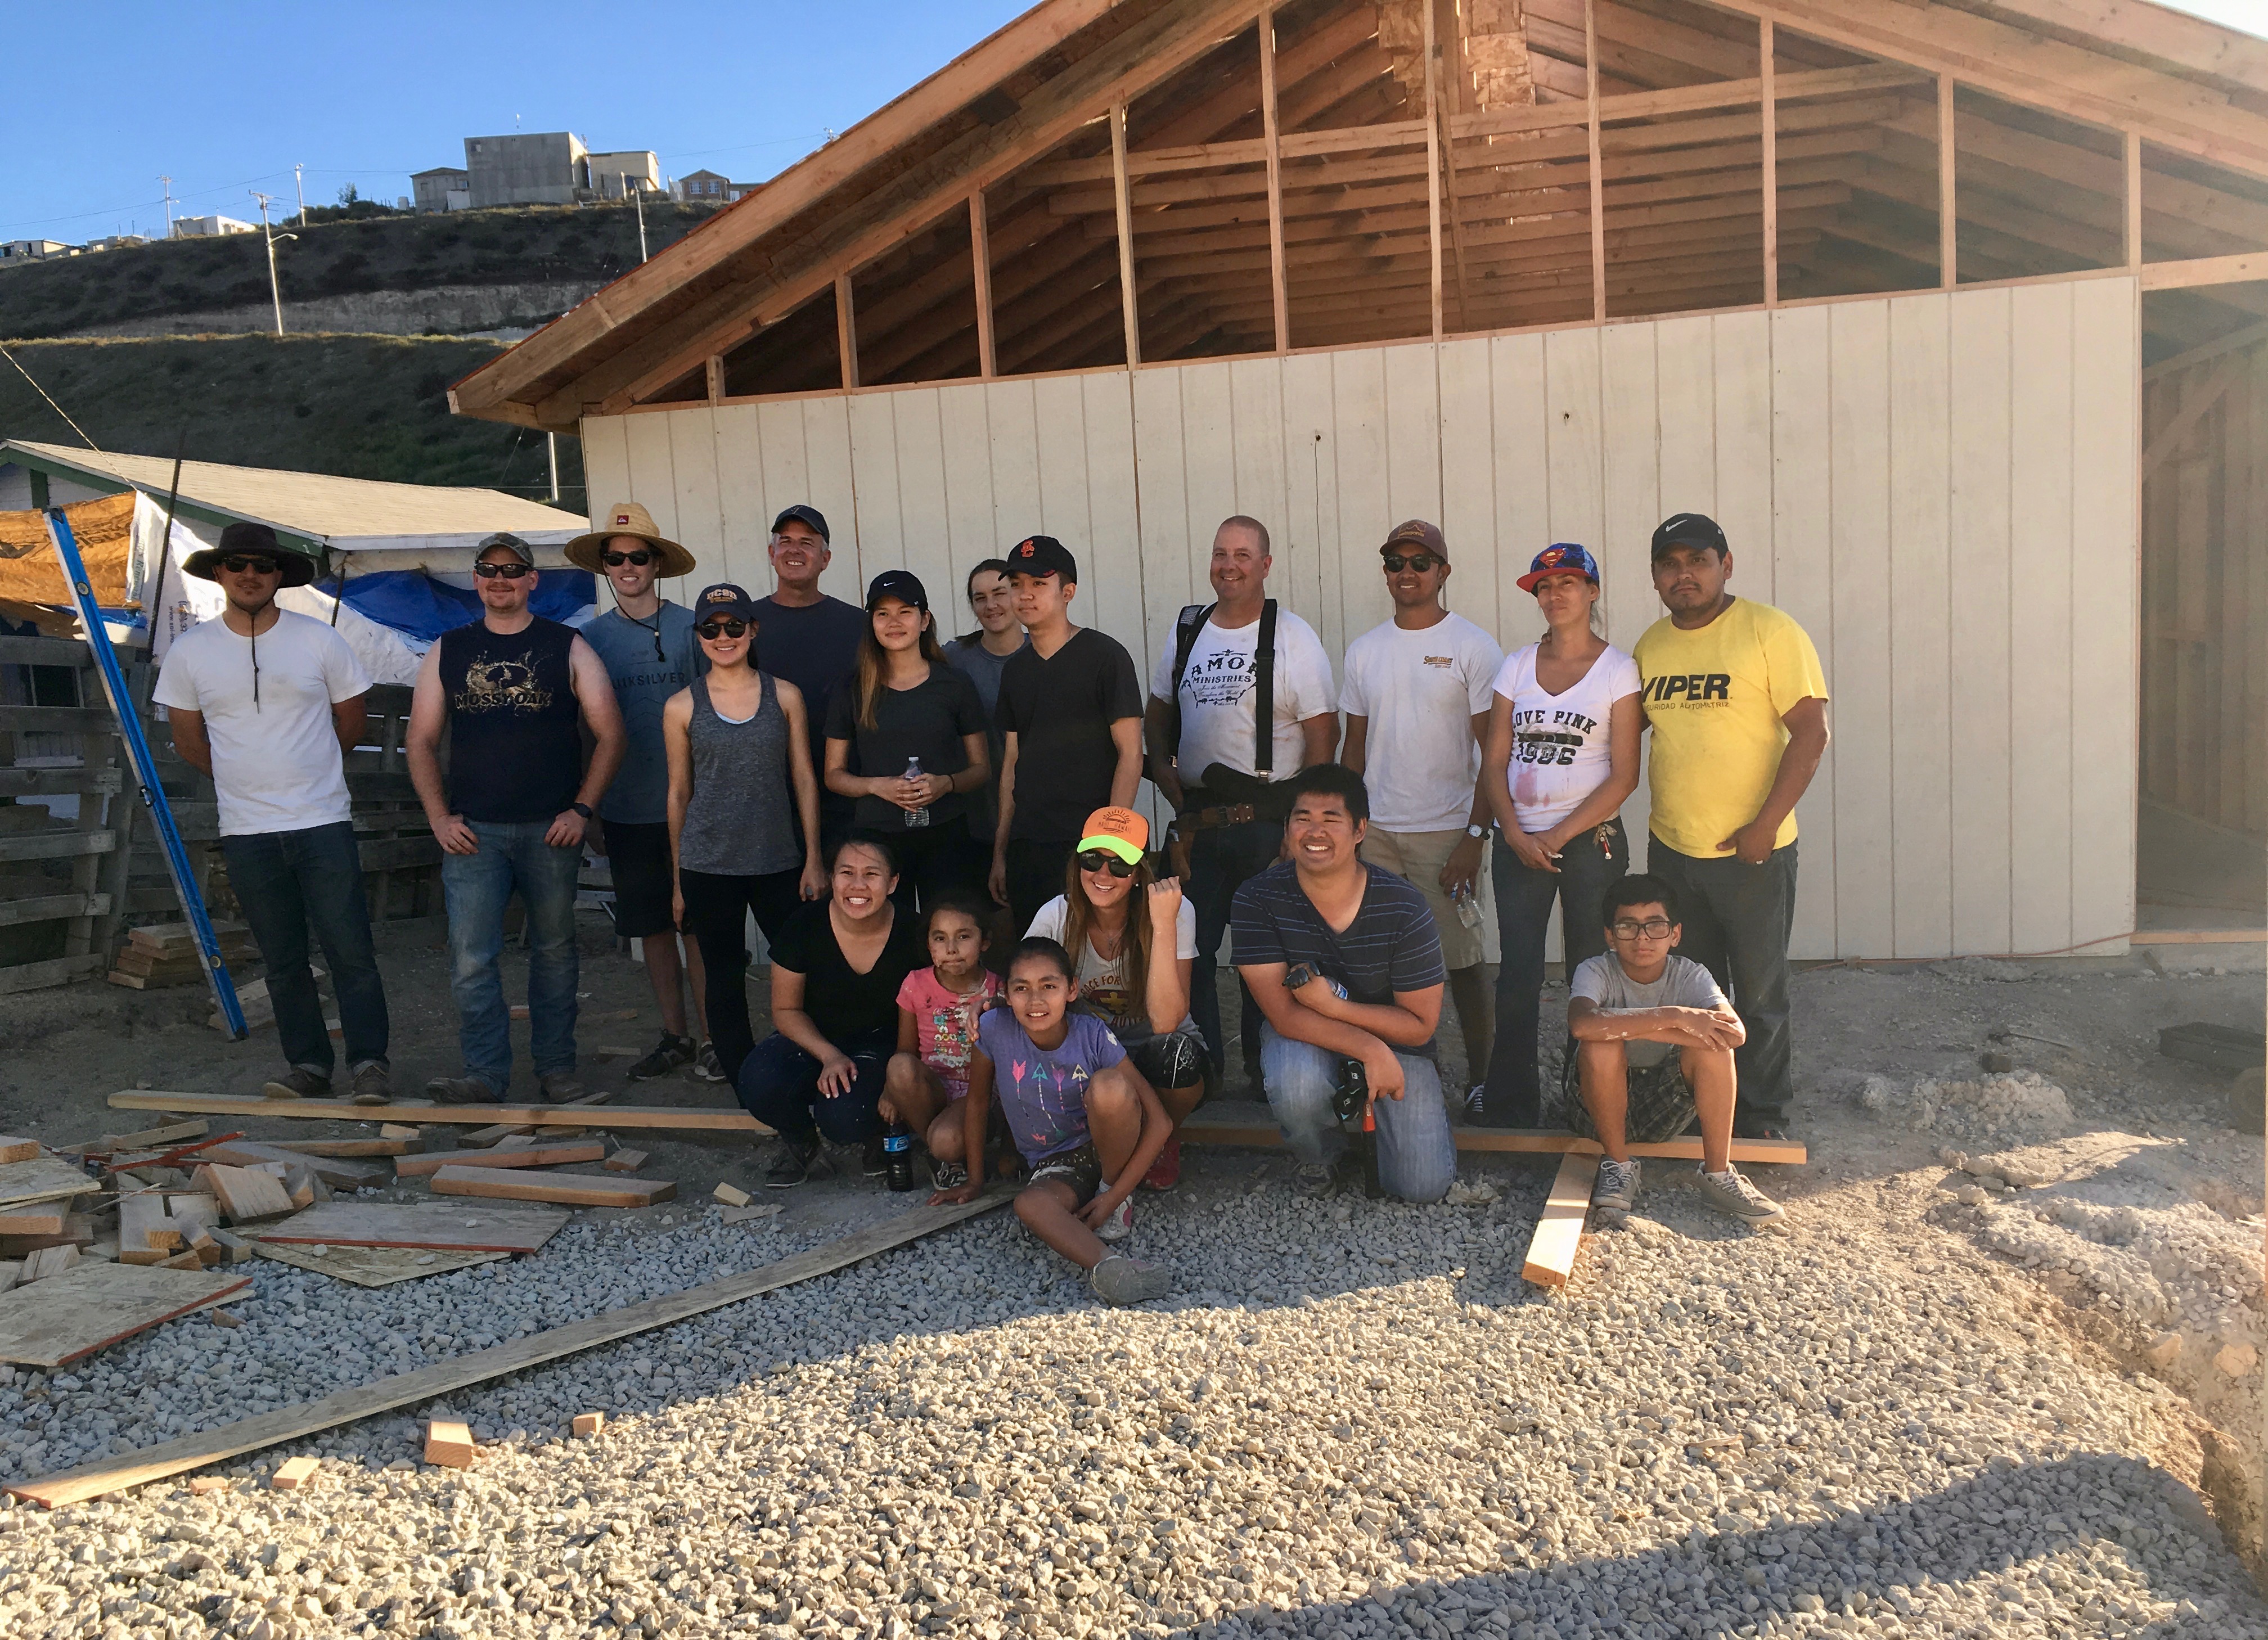 Our amazing group who came down to build the church with Pastor Obed Lares and his wife Cesiah on the right 